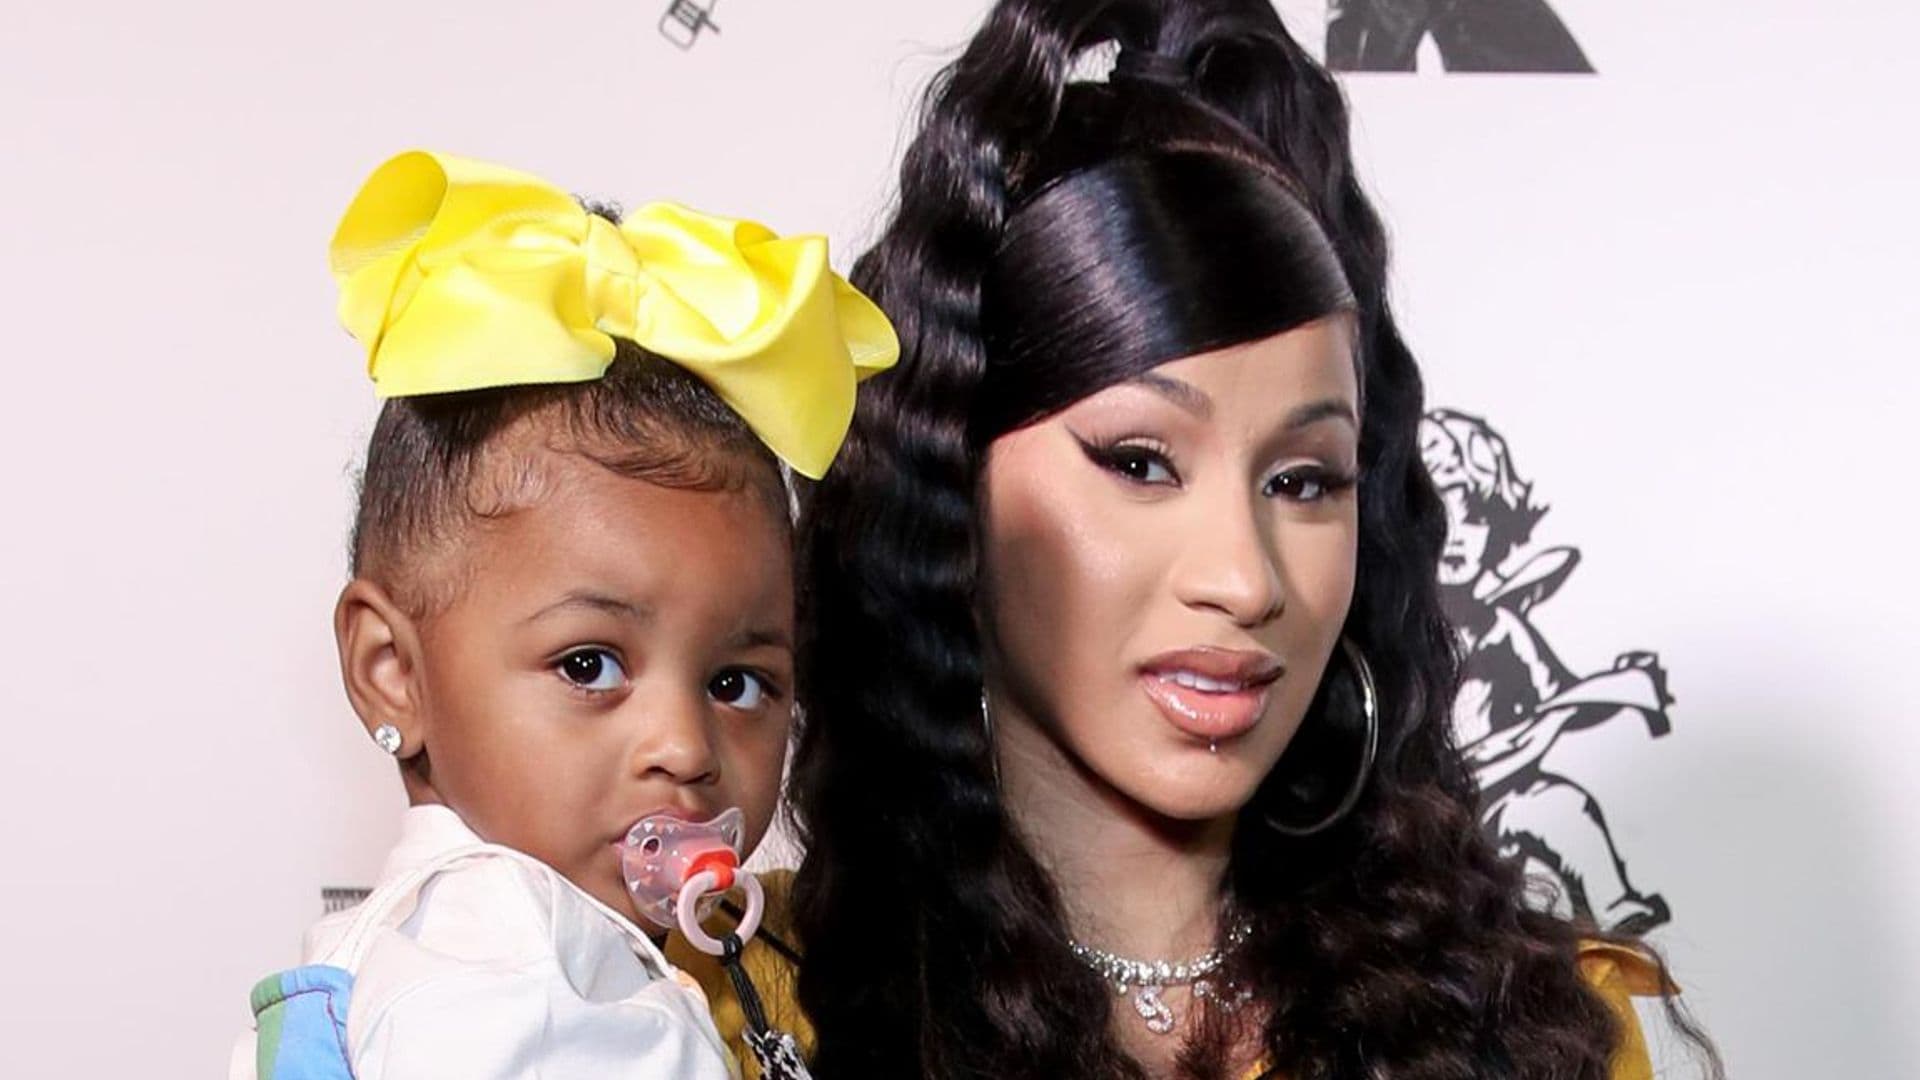 Cardi B defends 2-year-old daughter Kulture’s Birkin bag: ‘She’s gonna match mommy’